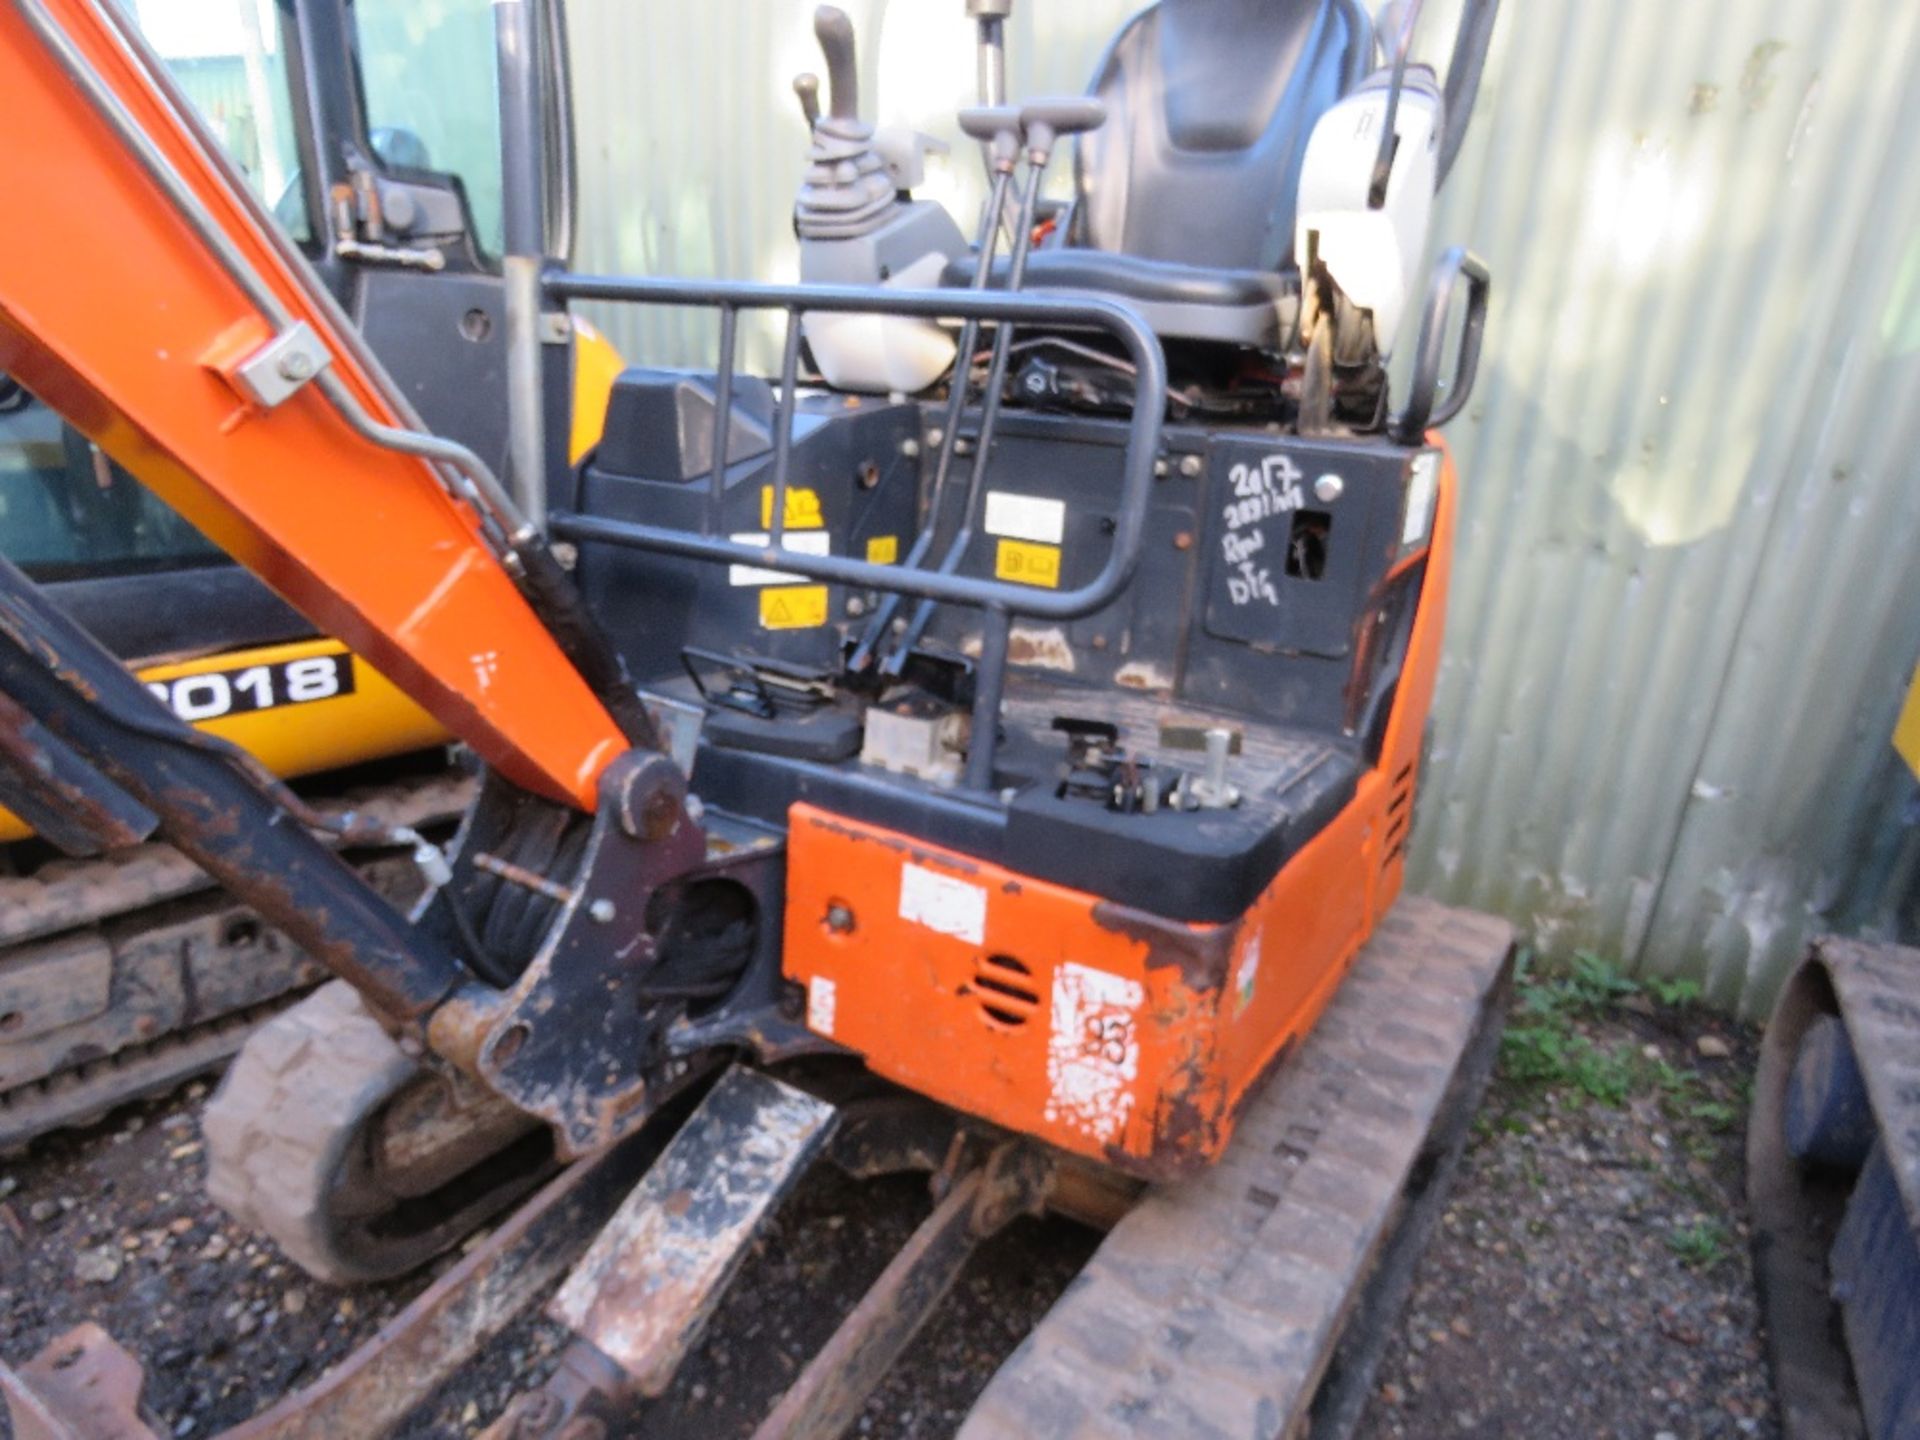 HITACHI ZAXIS 19U RUBBER TRACKED MINI EXCAVATOR, YEAR 2017 BUILD, WITH 2 BUCKETS, 2822 RECORDED HOUR